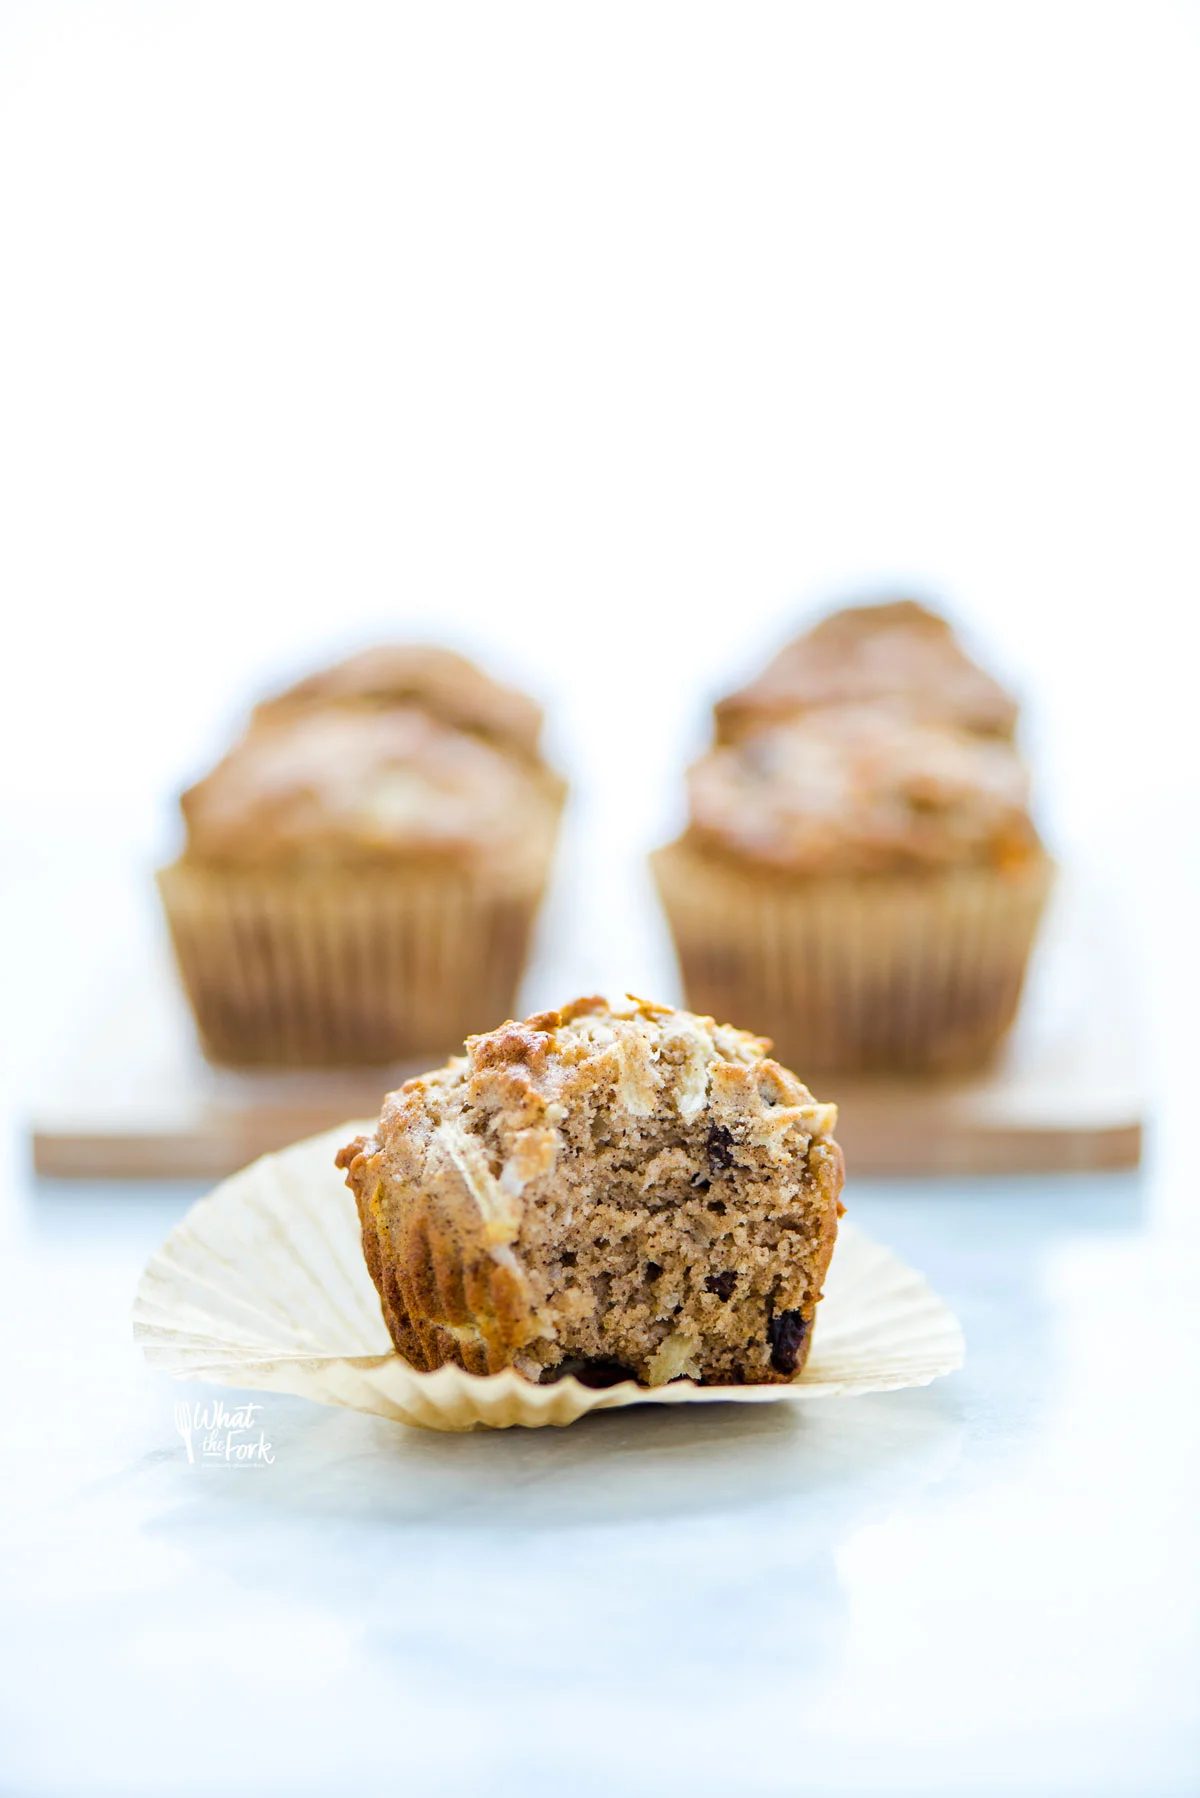 a gluten free morning glory muffin unwrapped an on top of a brown paper liner with a bite taken out of the muffin